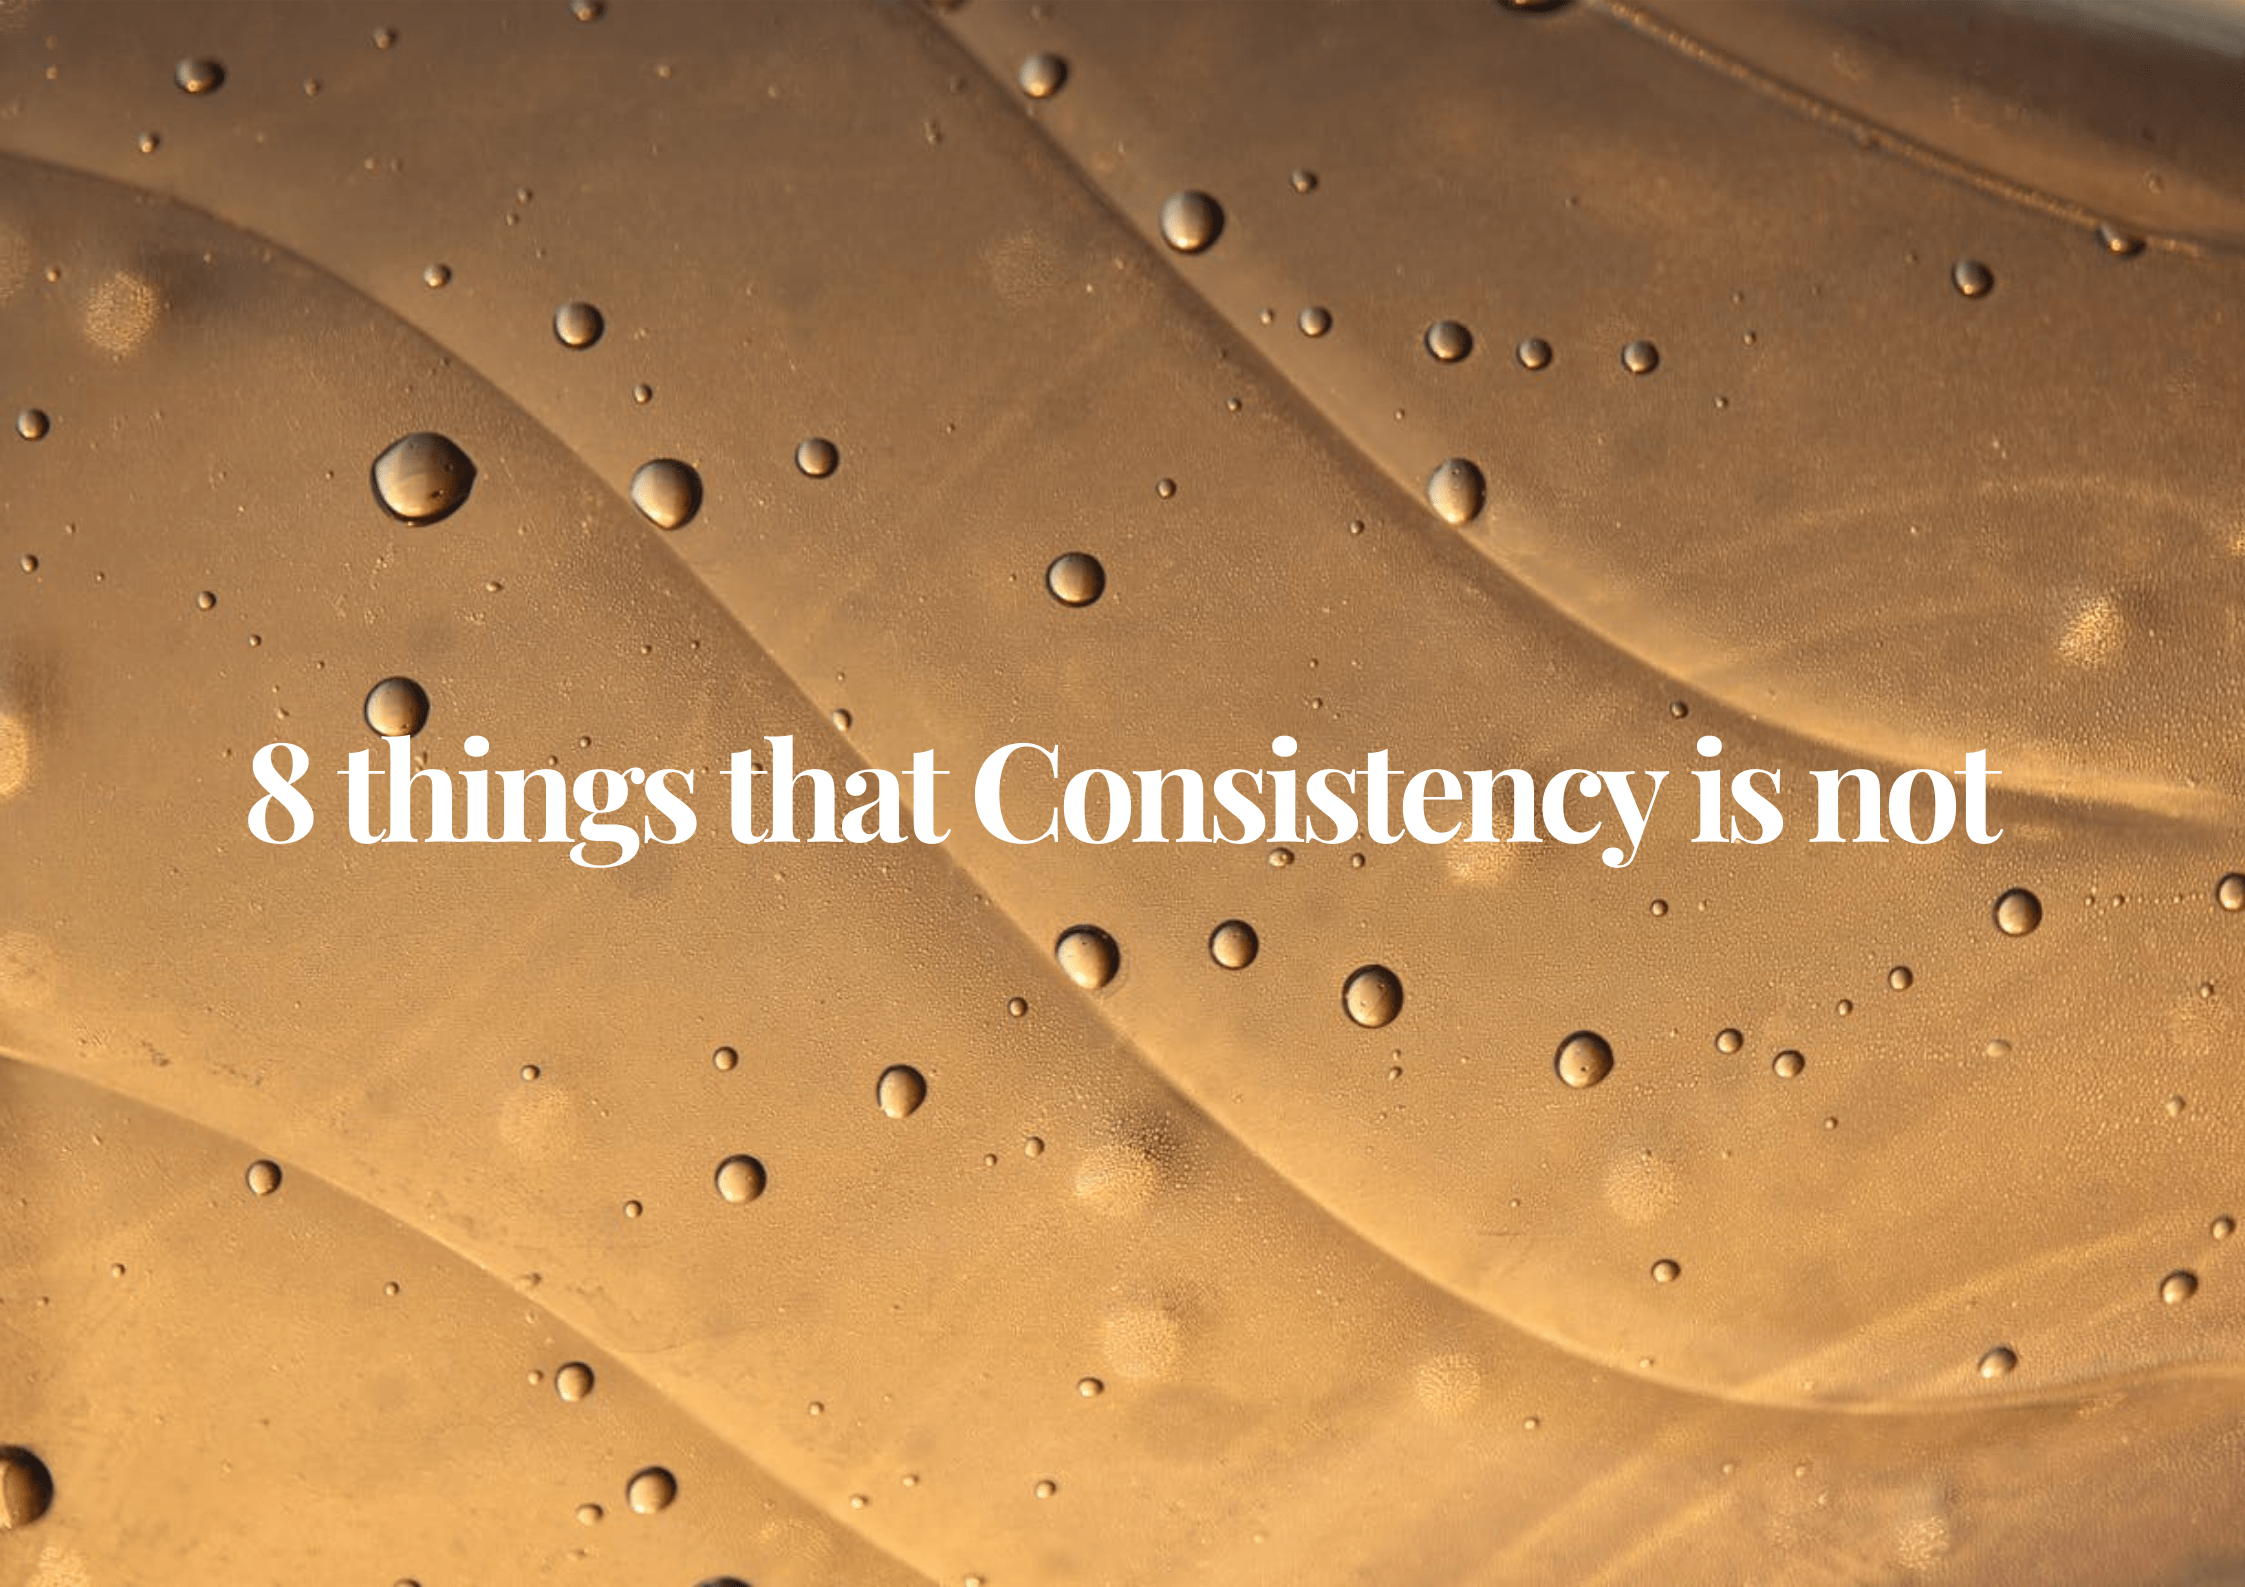 8 things that Consistency is not. by cabiojinia